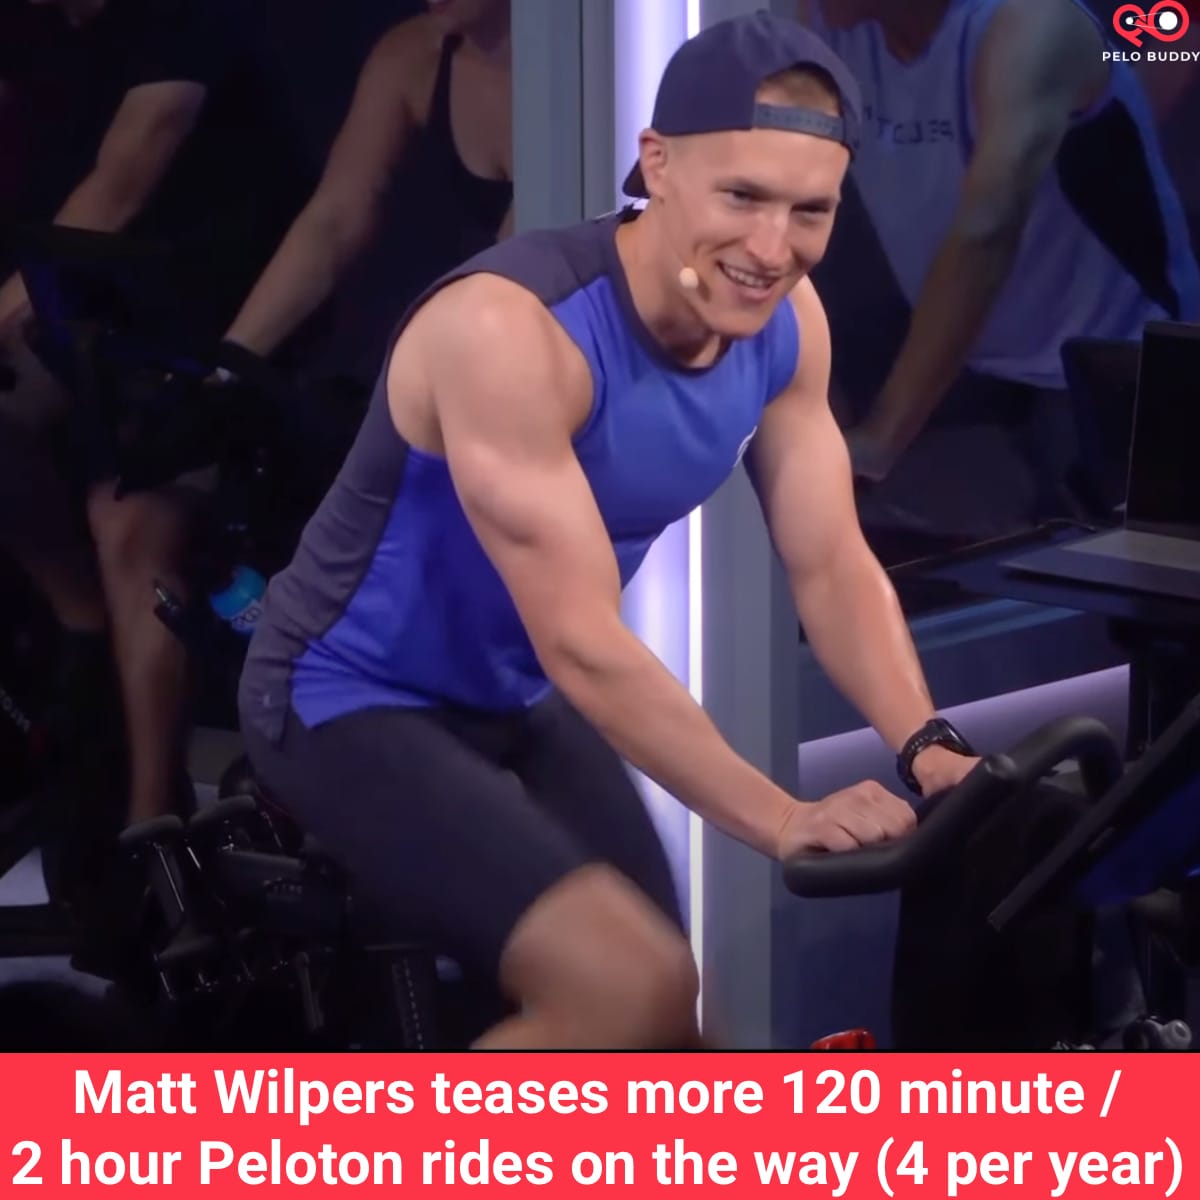 Matt Wilpers teases more 120 minute / 2 hour Peloton rides on the way (4  per year) - Peloton Buddy